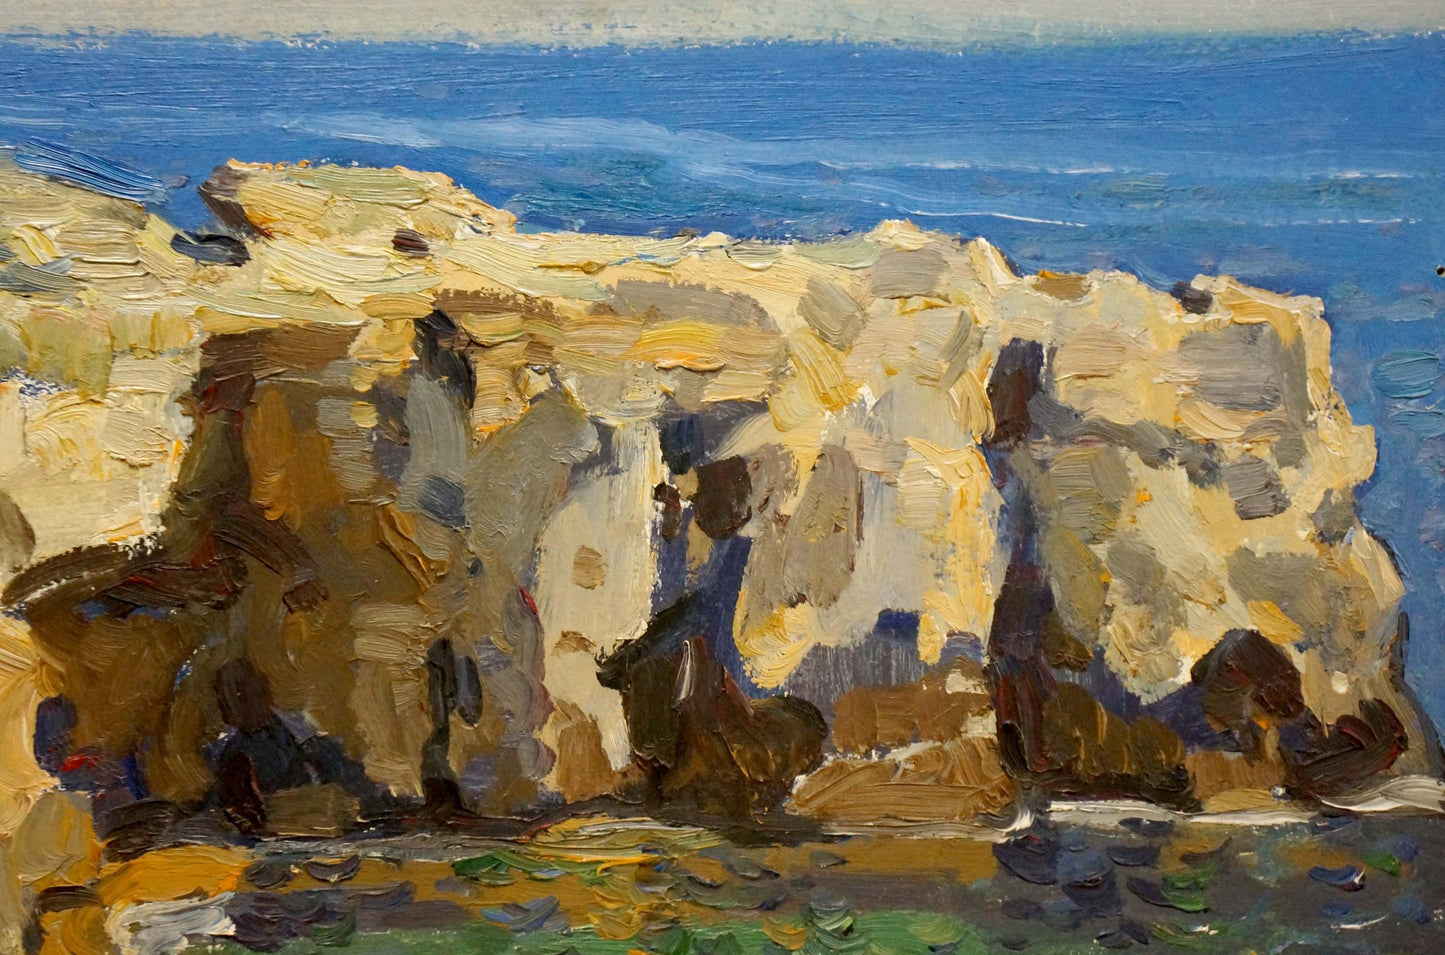 Within the oil painting, Yuri Alexandrovich Konovalov portrays a landscape adjacent to a cliff